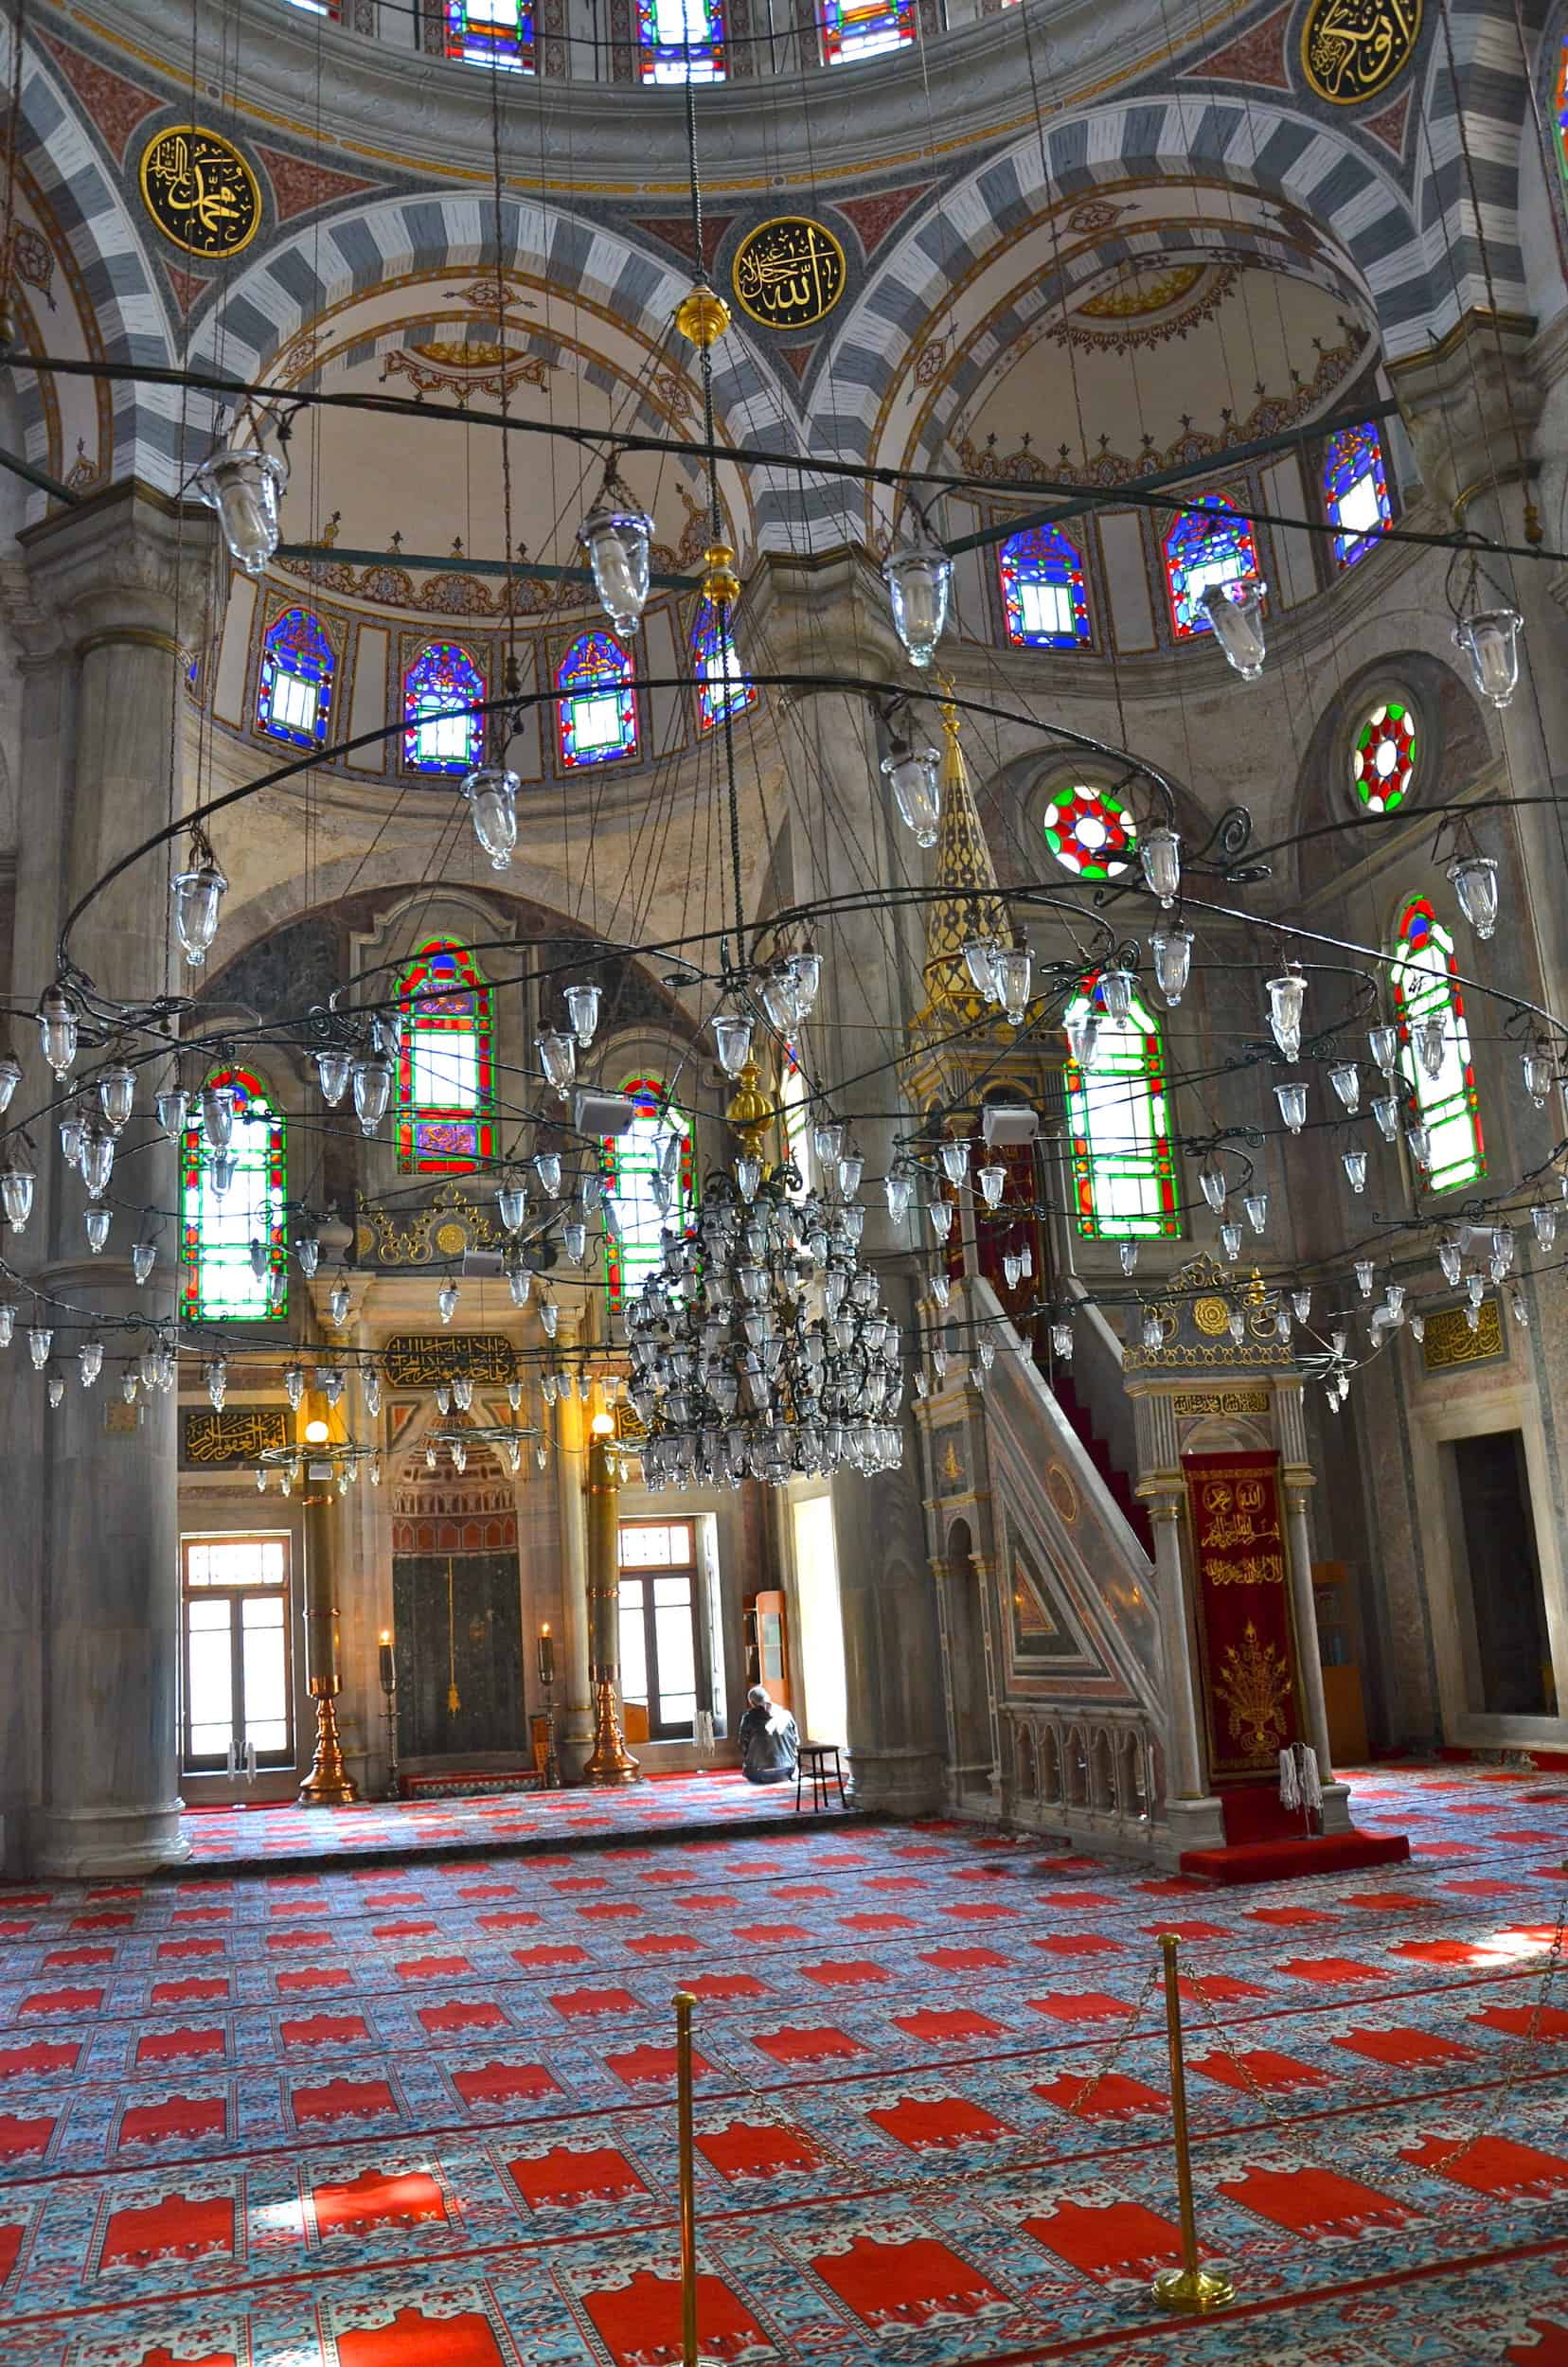 Prayer hall of the Laleli Mosque in Laleli, Istanbul, Turkey